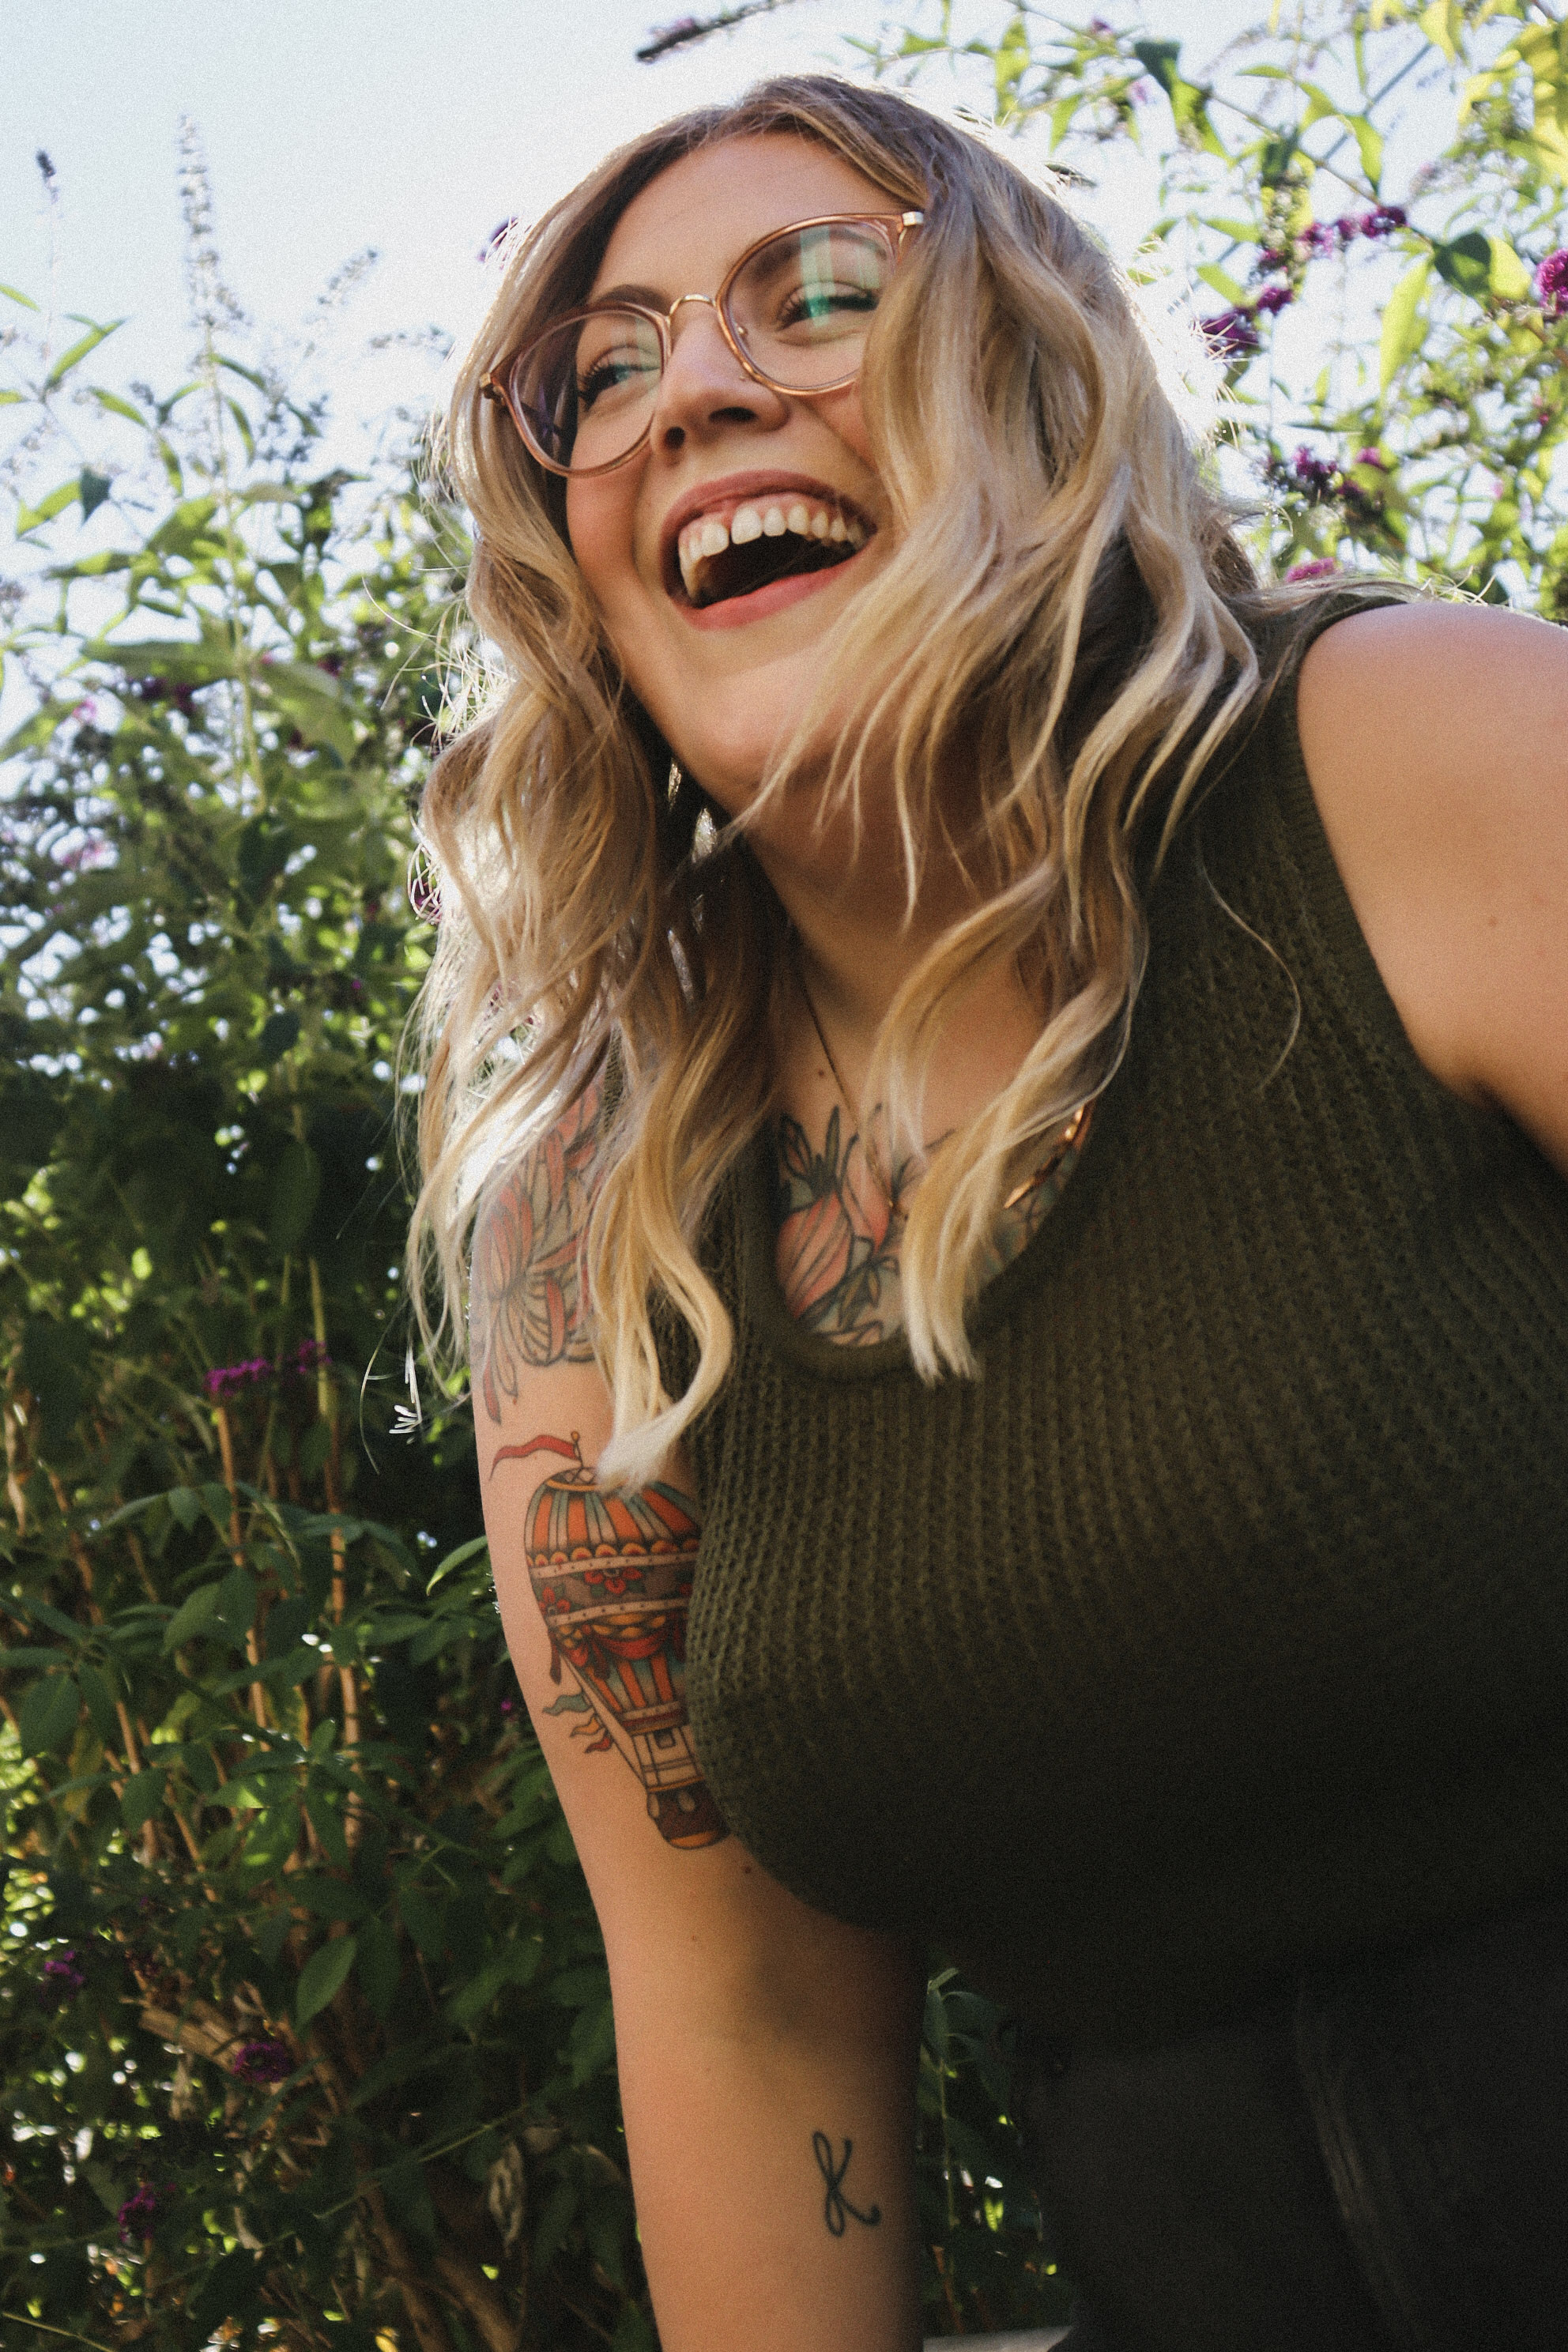 Karli smiling outdoors, wearing glasses and a sleeveless top